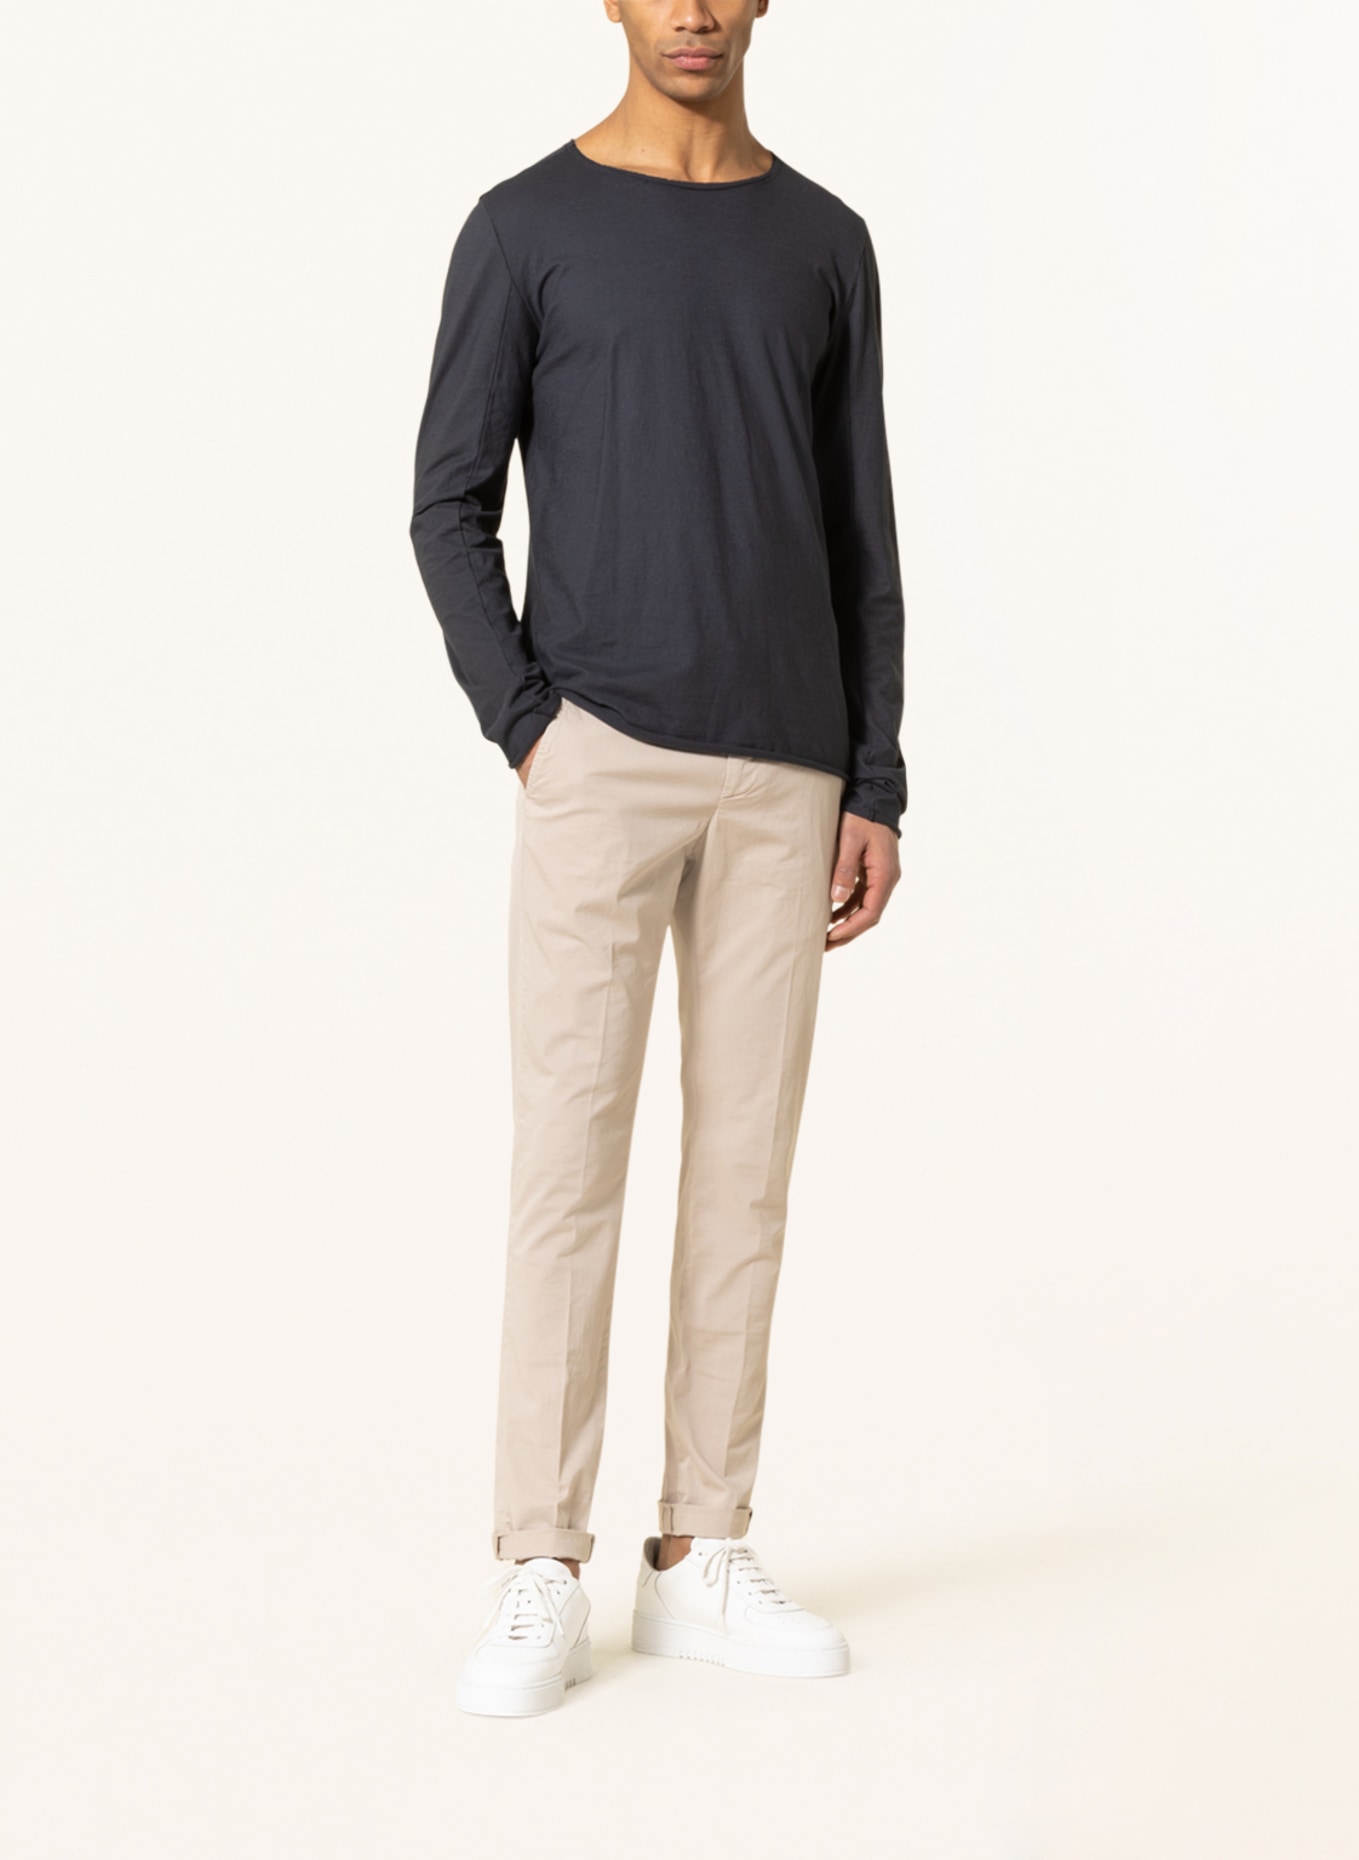 hannes roether Long sleeve shirt, Color: DARK GRAY (Image 2)